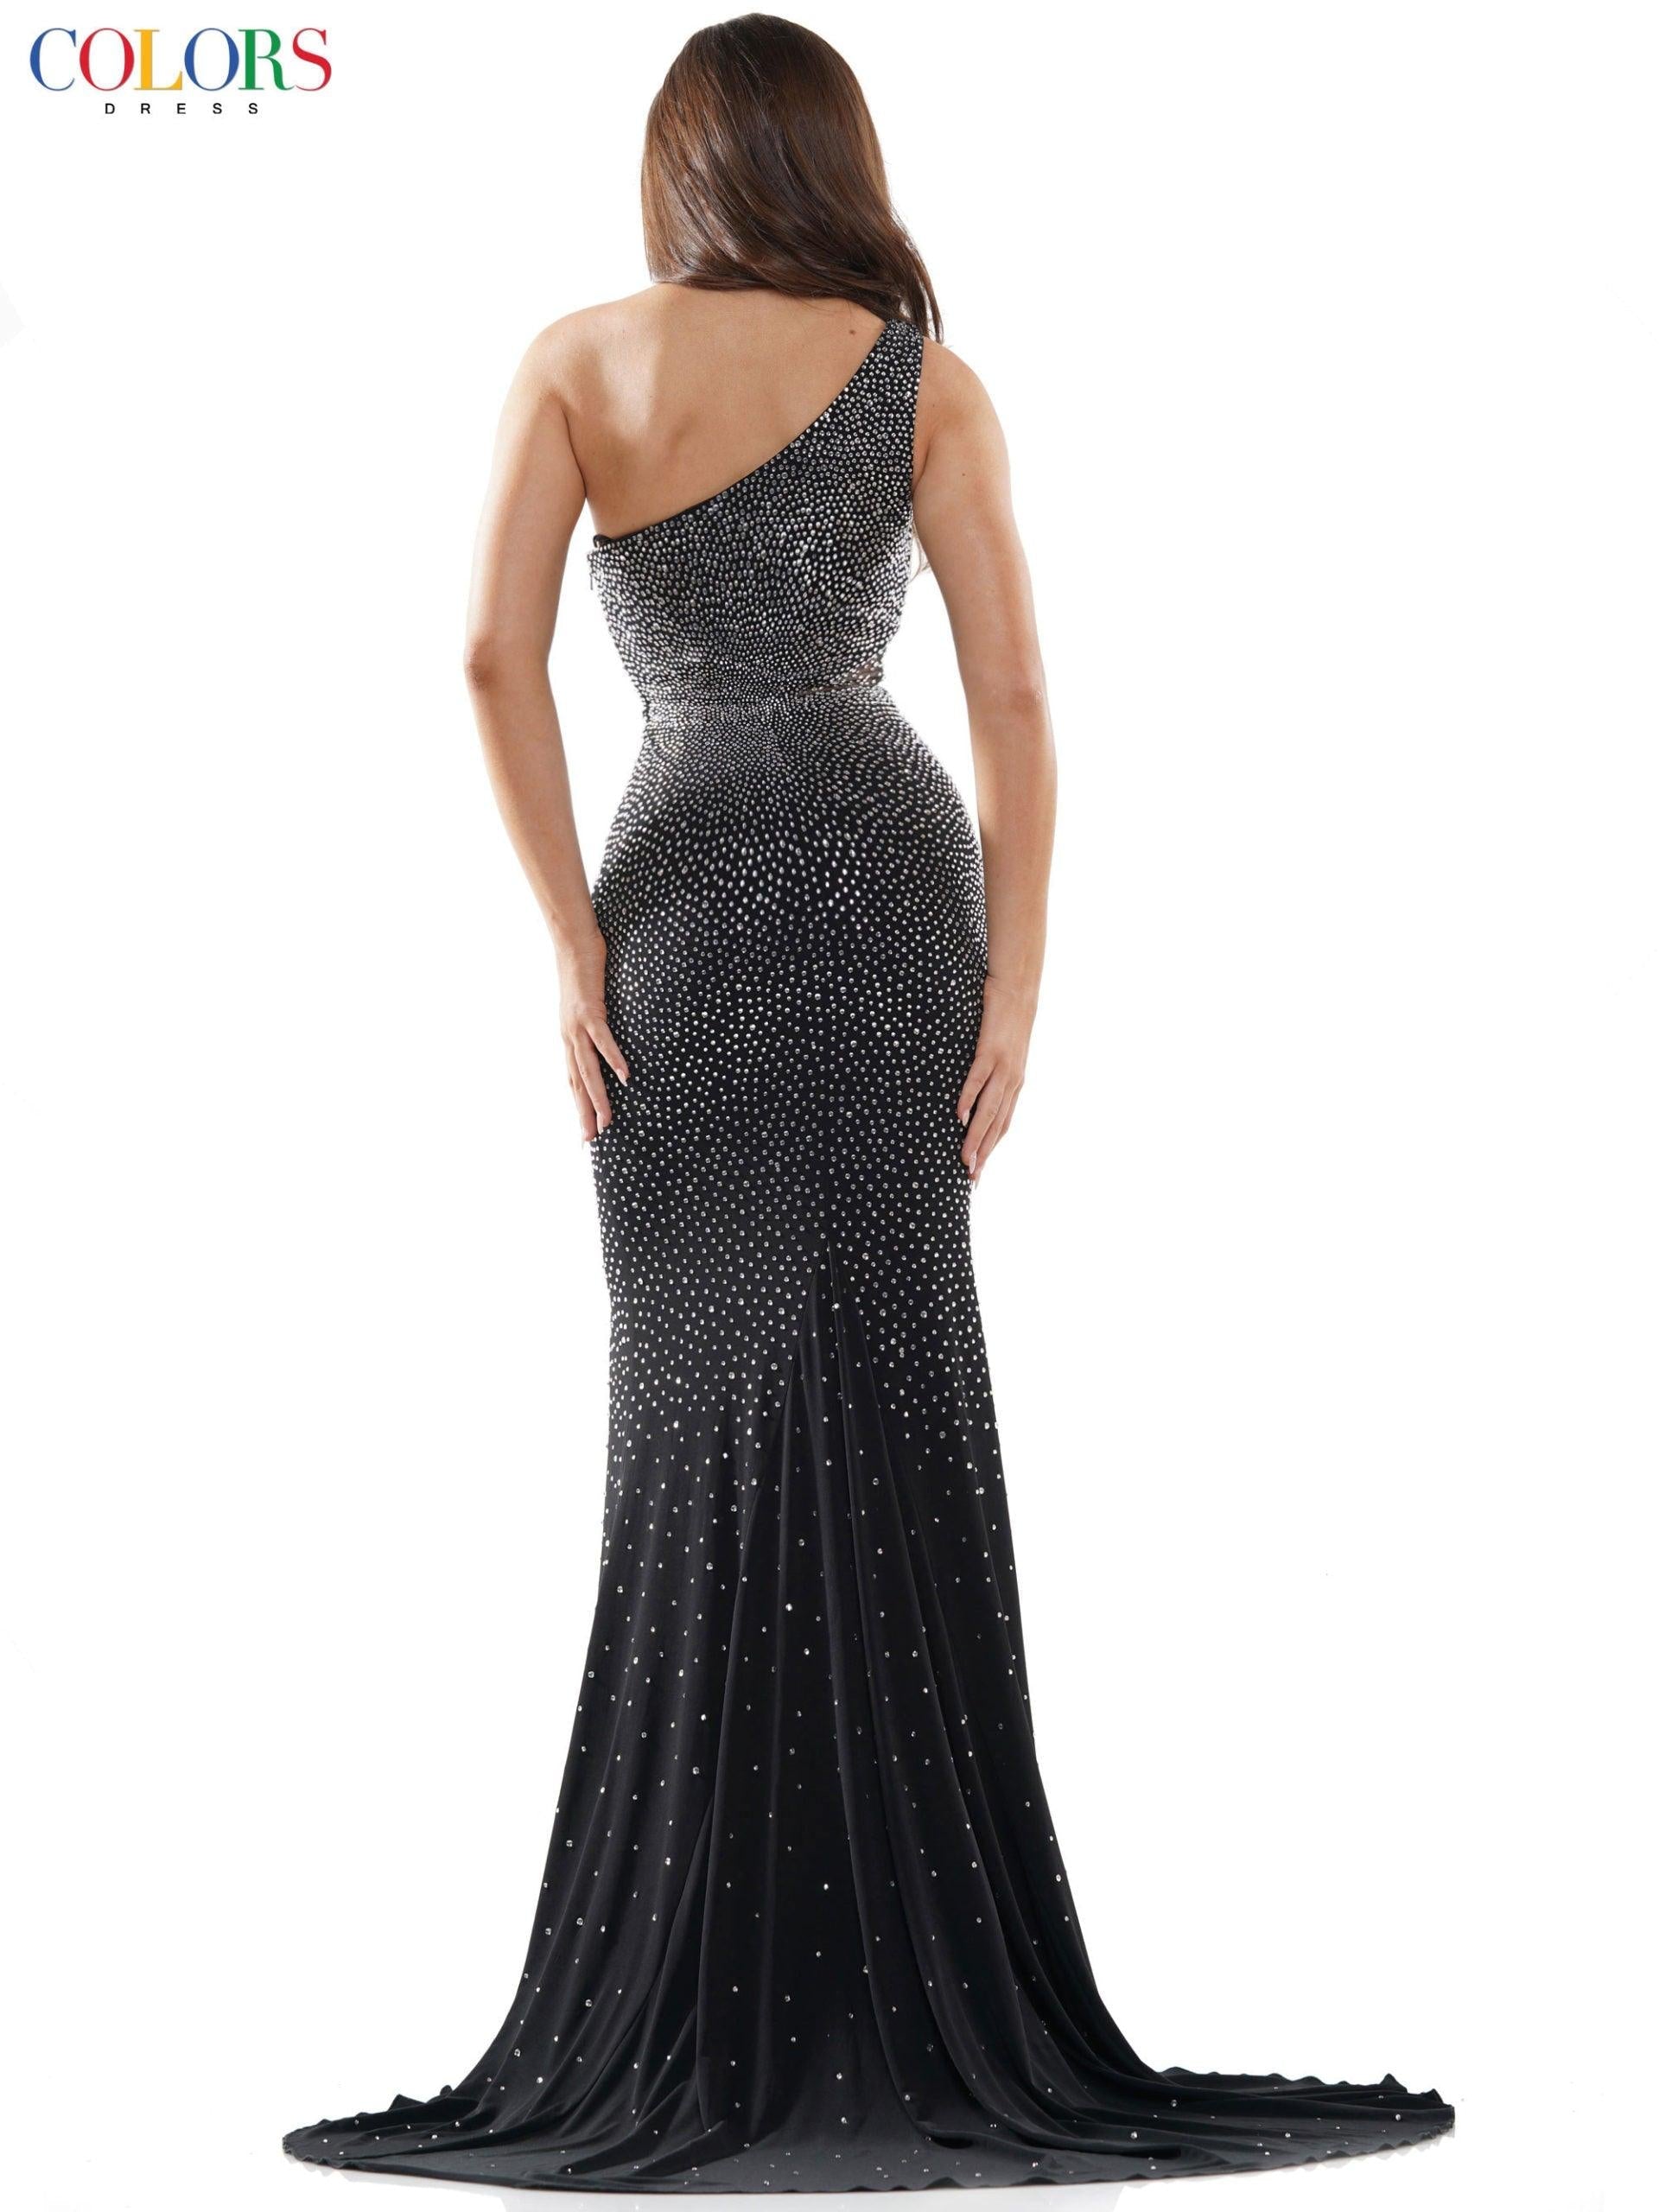 Colors Long One Shoulder Fitted Prom Dress 2647 - The Dress Outlet